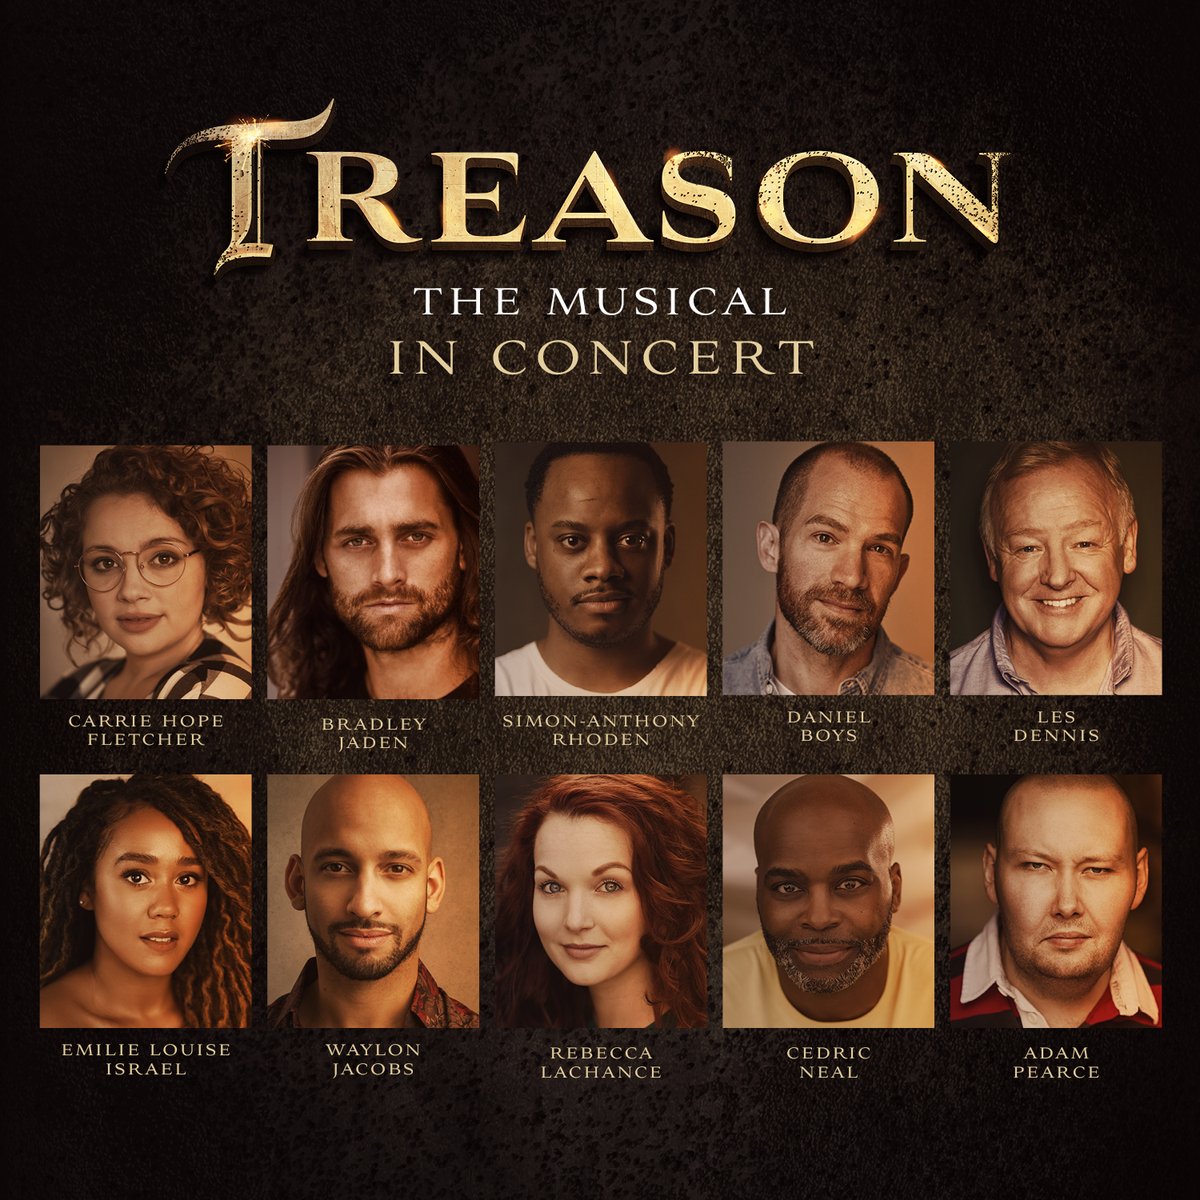 Gunpowder, treason, and plot...

Sending all our love to @BradleyJaden for the special run of #TreasonTheMusical at @TheatreRoyalDL!!💐👏  

👉The concert will perform tonight & tomorrow only!

✨Cast by: @harryblumenau 

@TreasonMusical @PeterBrooksCAM @miss_scanlan